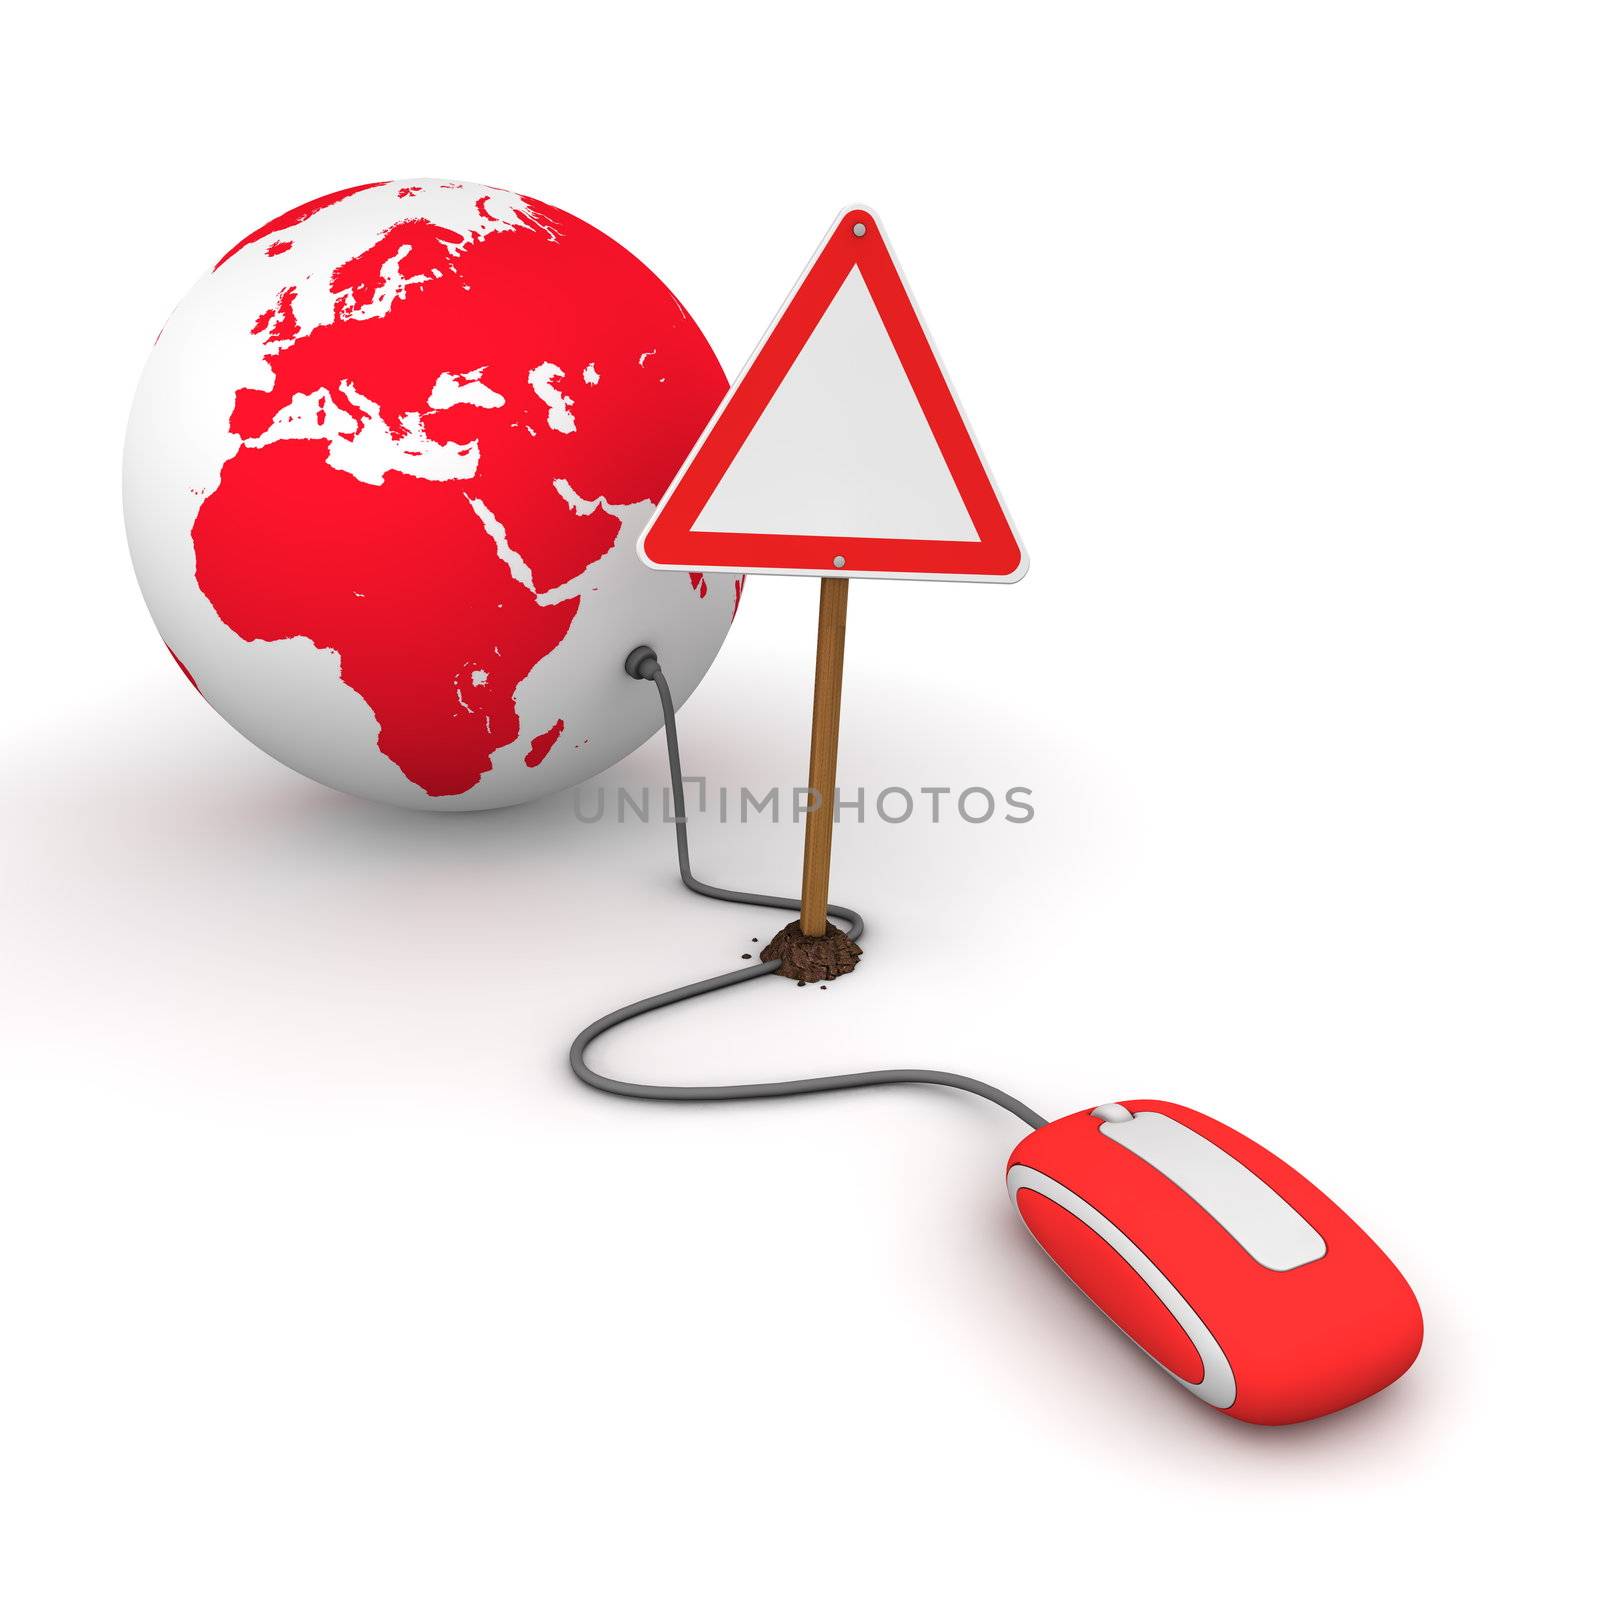 red computer mouse is connected to a red globe - surfing and browsing is blocked by a triangular red-white warning sign that cuts the cable - empty template sign